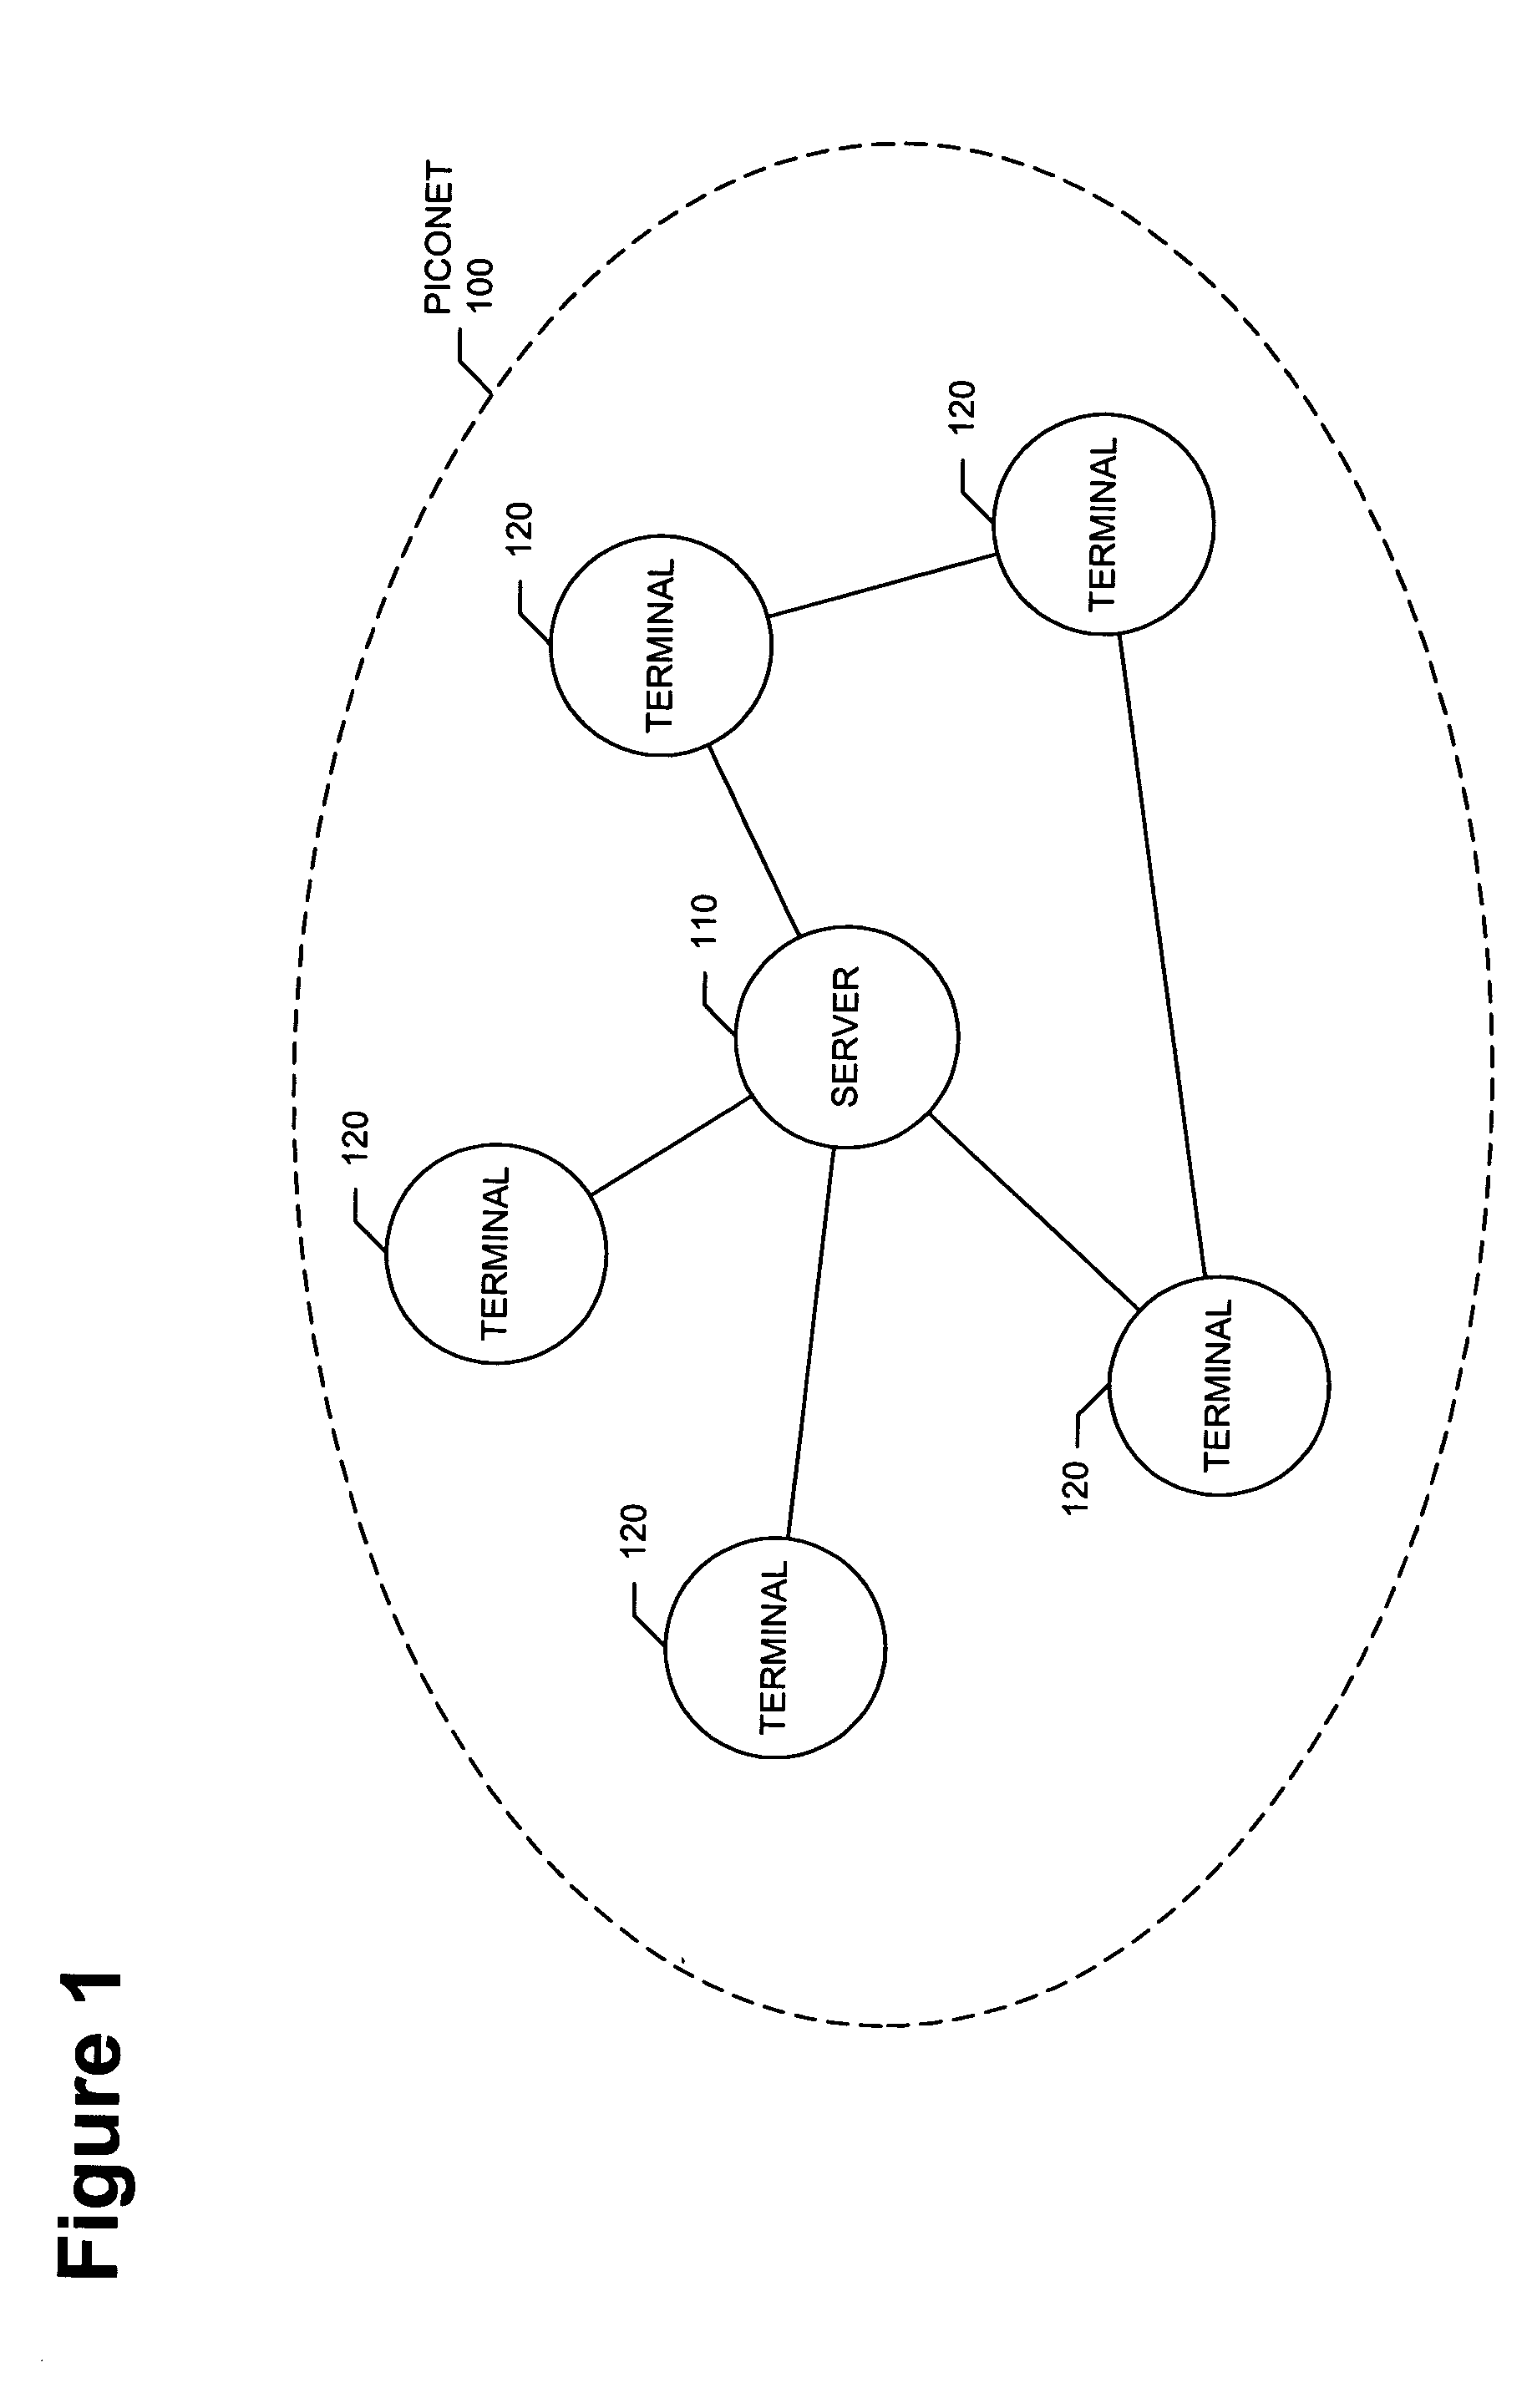 Mechanism for improving connection control in peer-to-peer ad-hoc networks